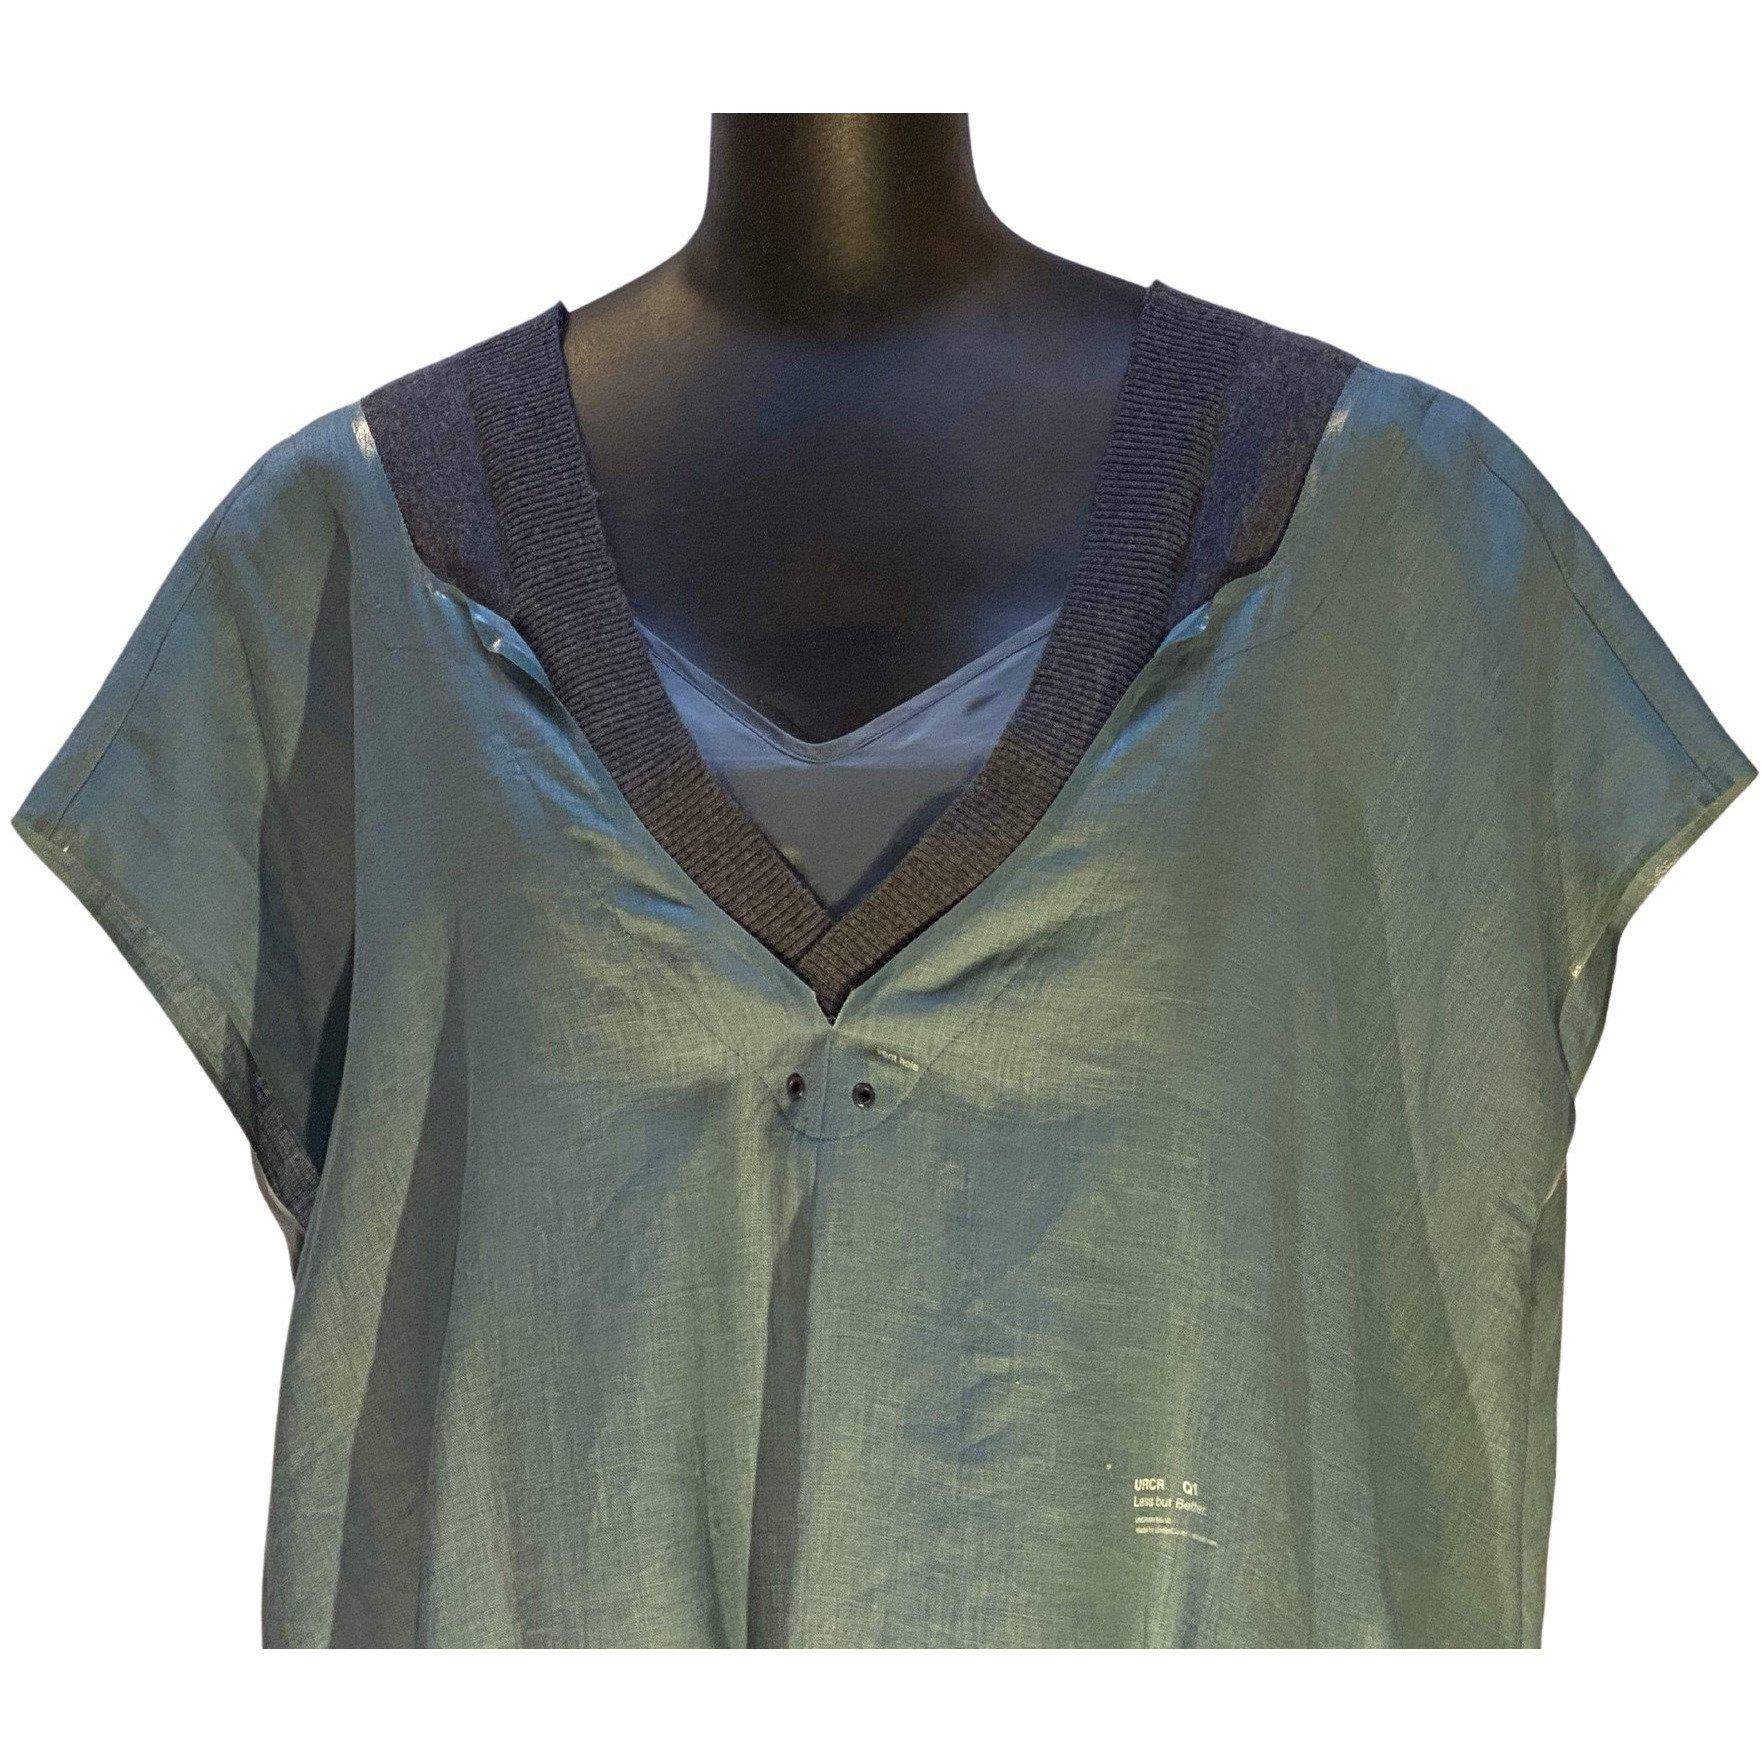 This beautiful soft, flowy blue-grey light linen tunic features a matching slip beneath. The v-neckline is highlighted, in front and back, by a contrasting grey cotton knit trim and grommet detailing. There are two side slit pockets. A discreet